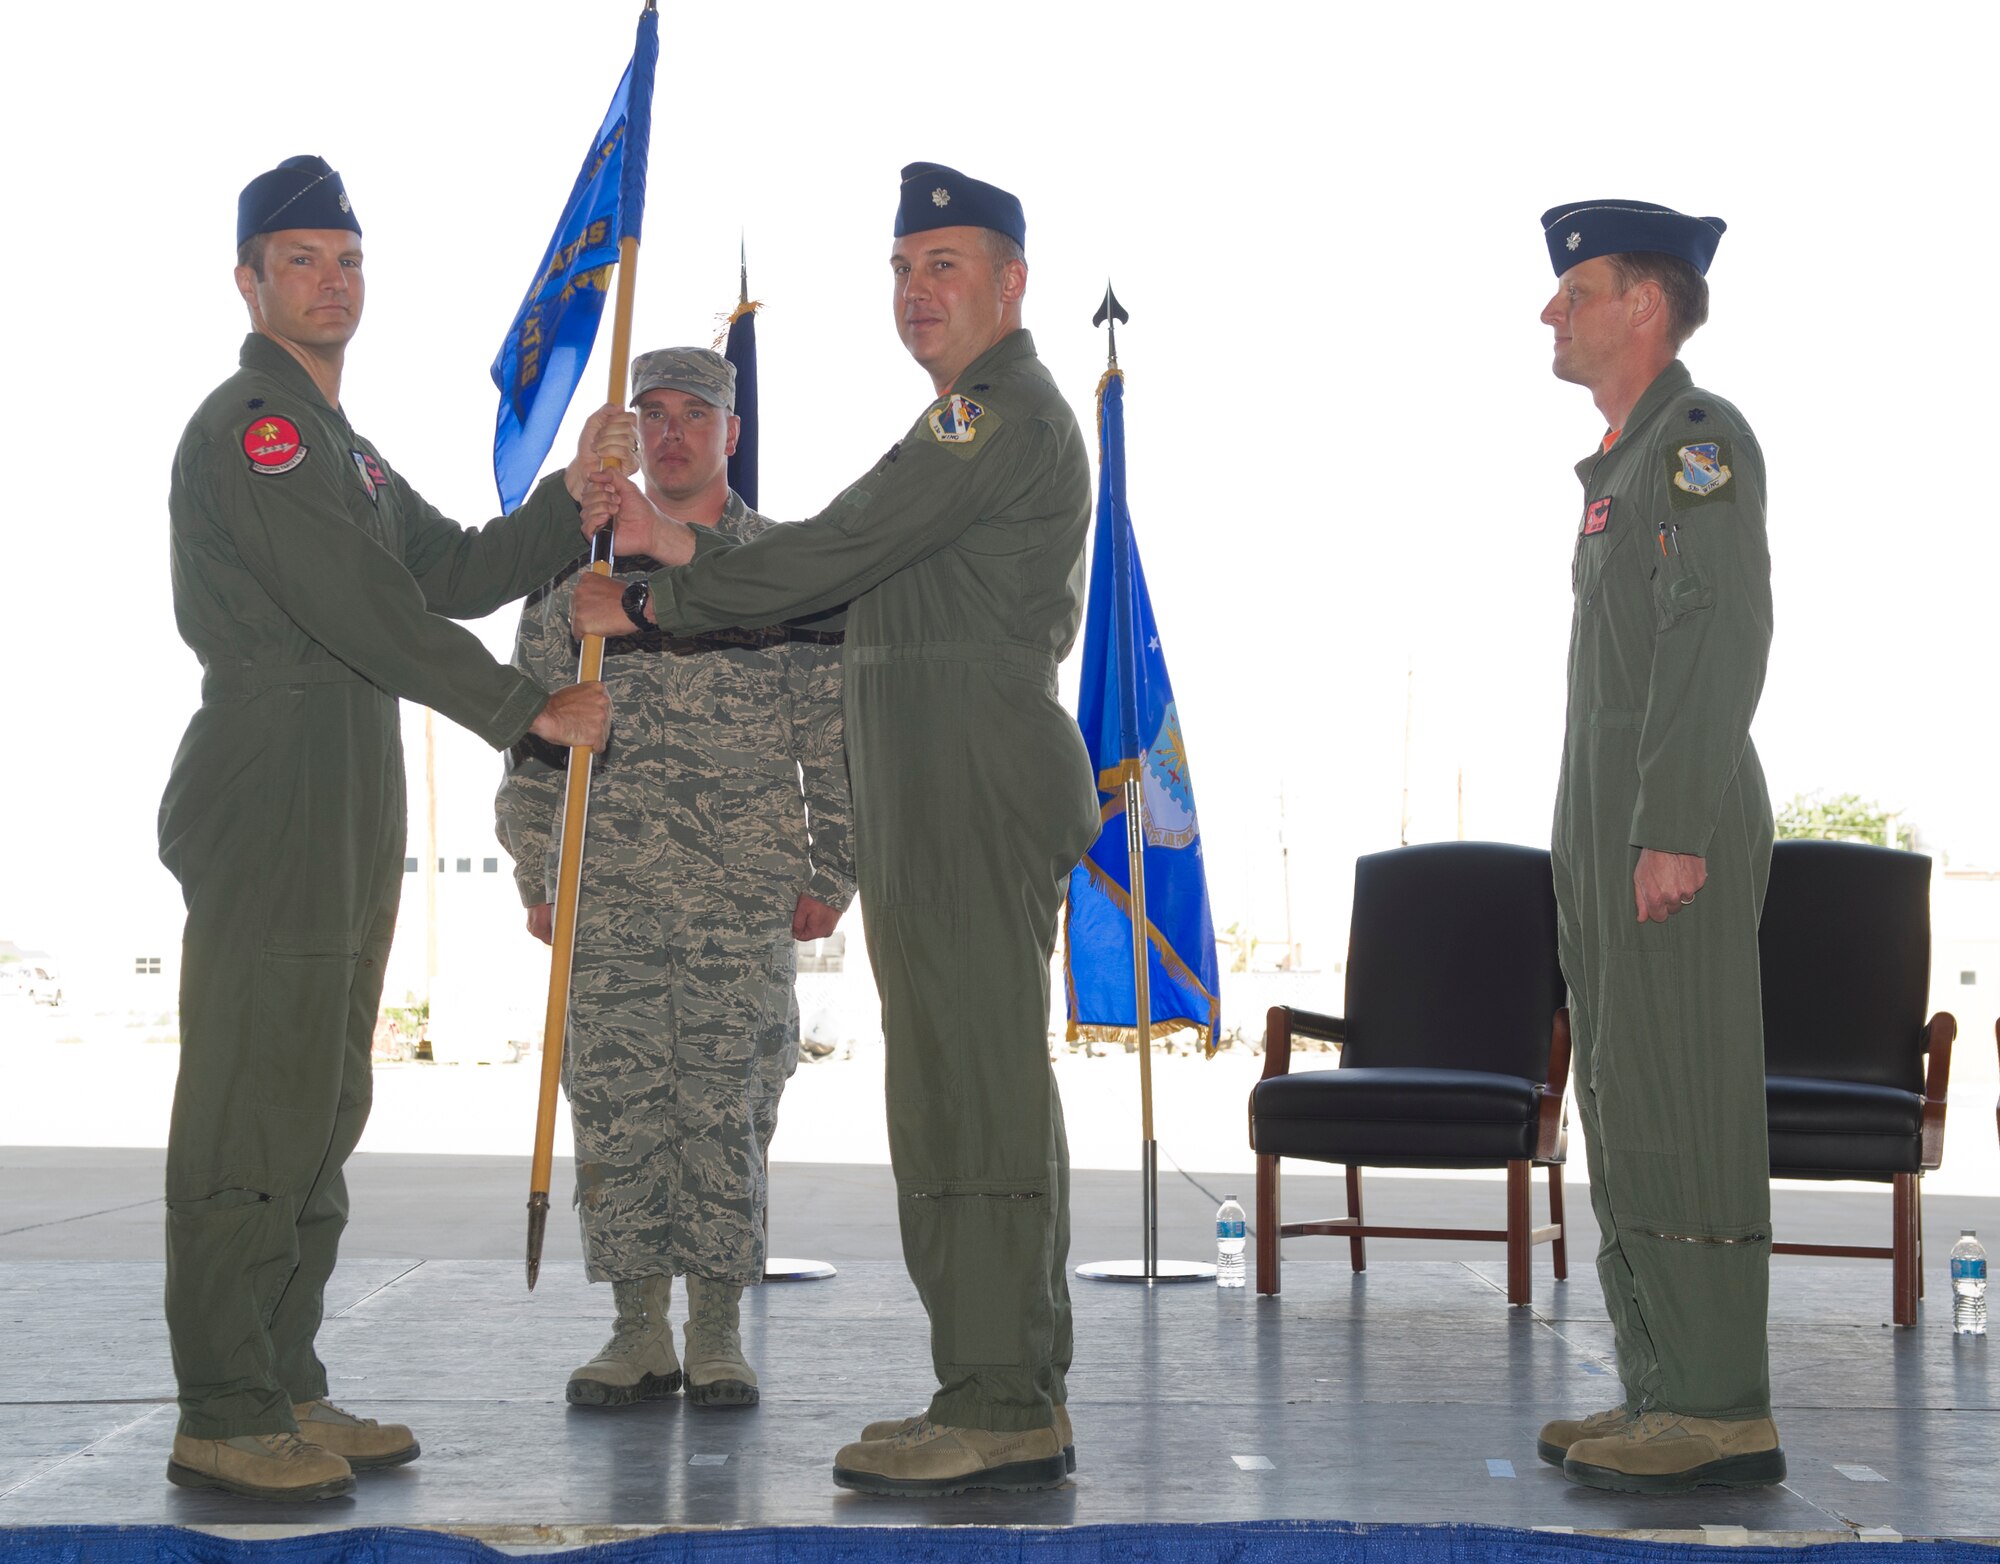 Lt. Col. Ronald King, the incoming commander, accepts Holloman’s Detachment 1, 82d Aerial Targets Squadron unit guidon from Lt. Col. Matthew Garrison, 82d ATRS commander from Tydell Air Force Base, Fl., symbolizing the seamless change of command at Holloman Air Force Base, N.M., June 5. In the ceremony King assumed command of the 82d ATRS from Lt. Col. Brian M. Swyt. Det 1, 82nd Aerial Targets Squadron operates QF-4 and QF-16 full-scale aerial targets for use at the White Sands Missile Range.  (U.S. Air Force photo by Staff Sgt. Stacy Moless/Released)